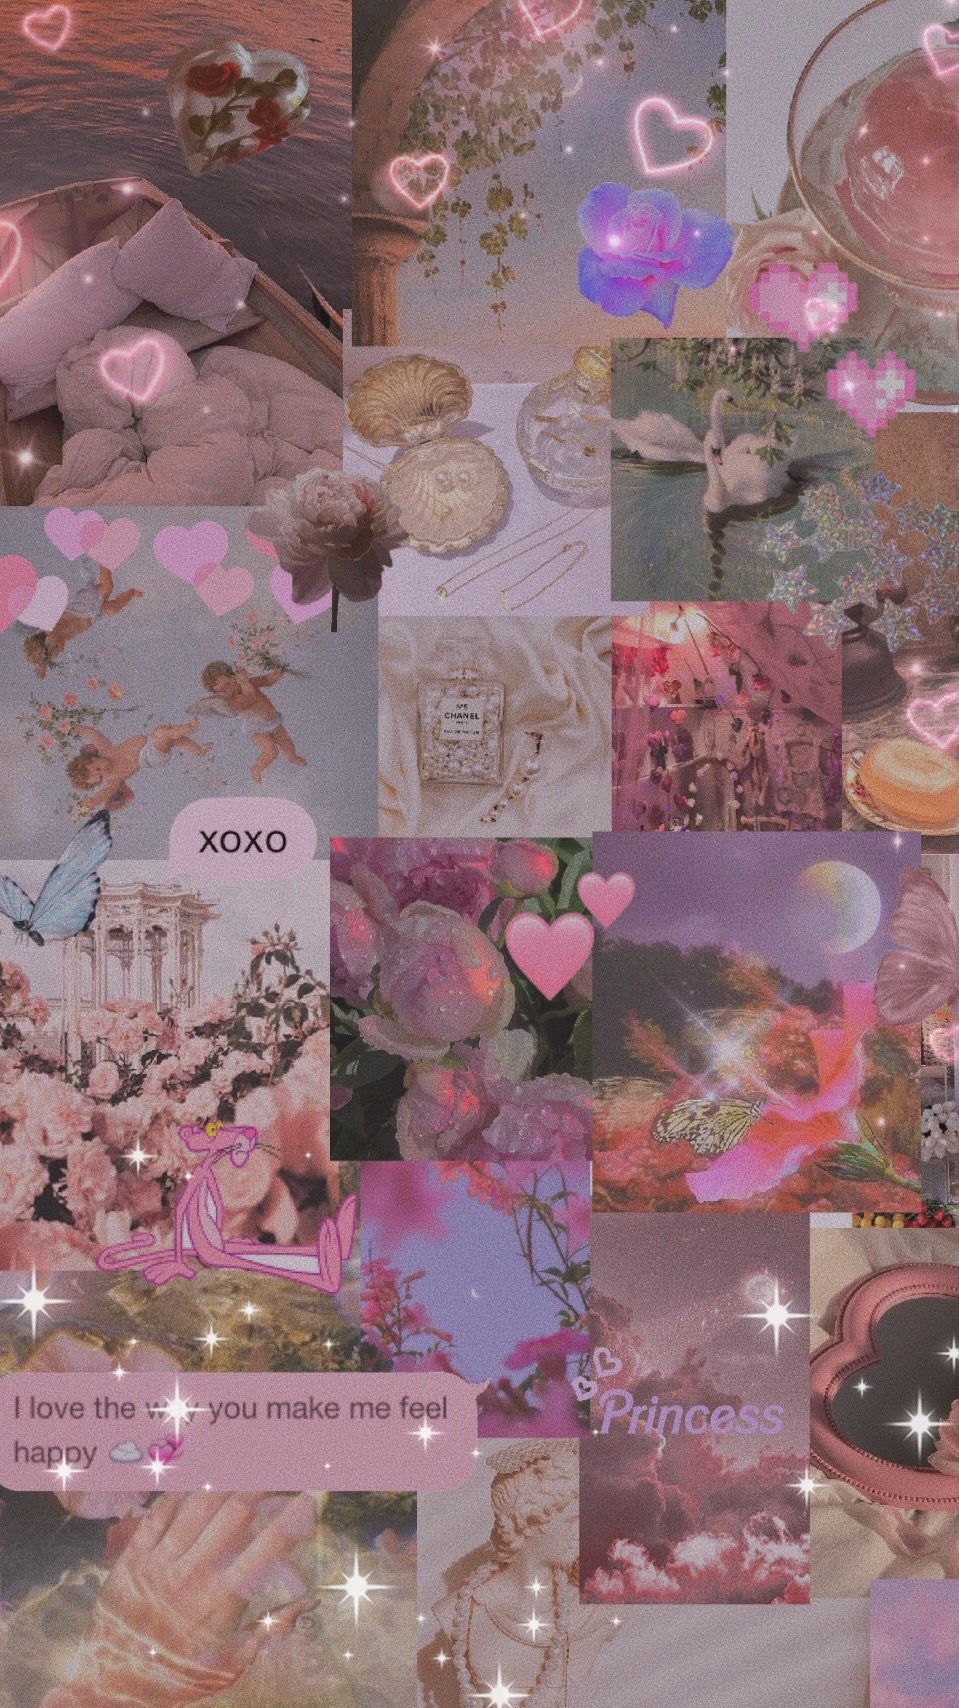 Pink dreamy aesthetic wallpapers in 2020